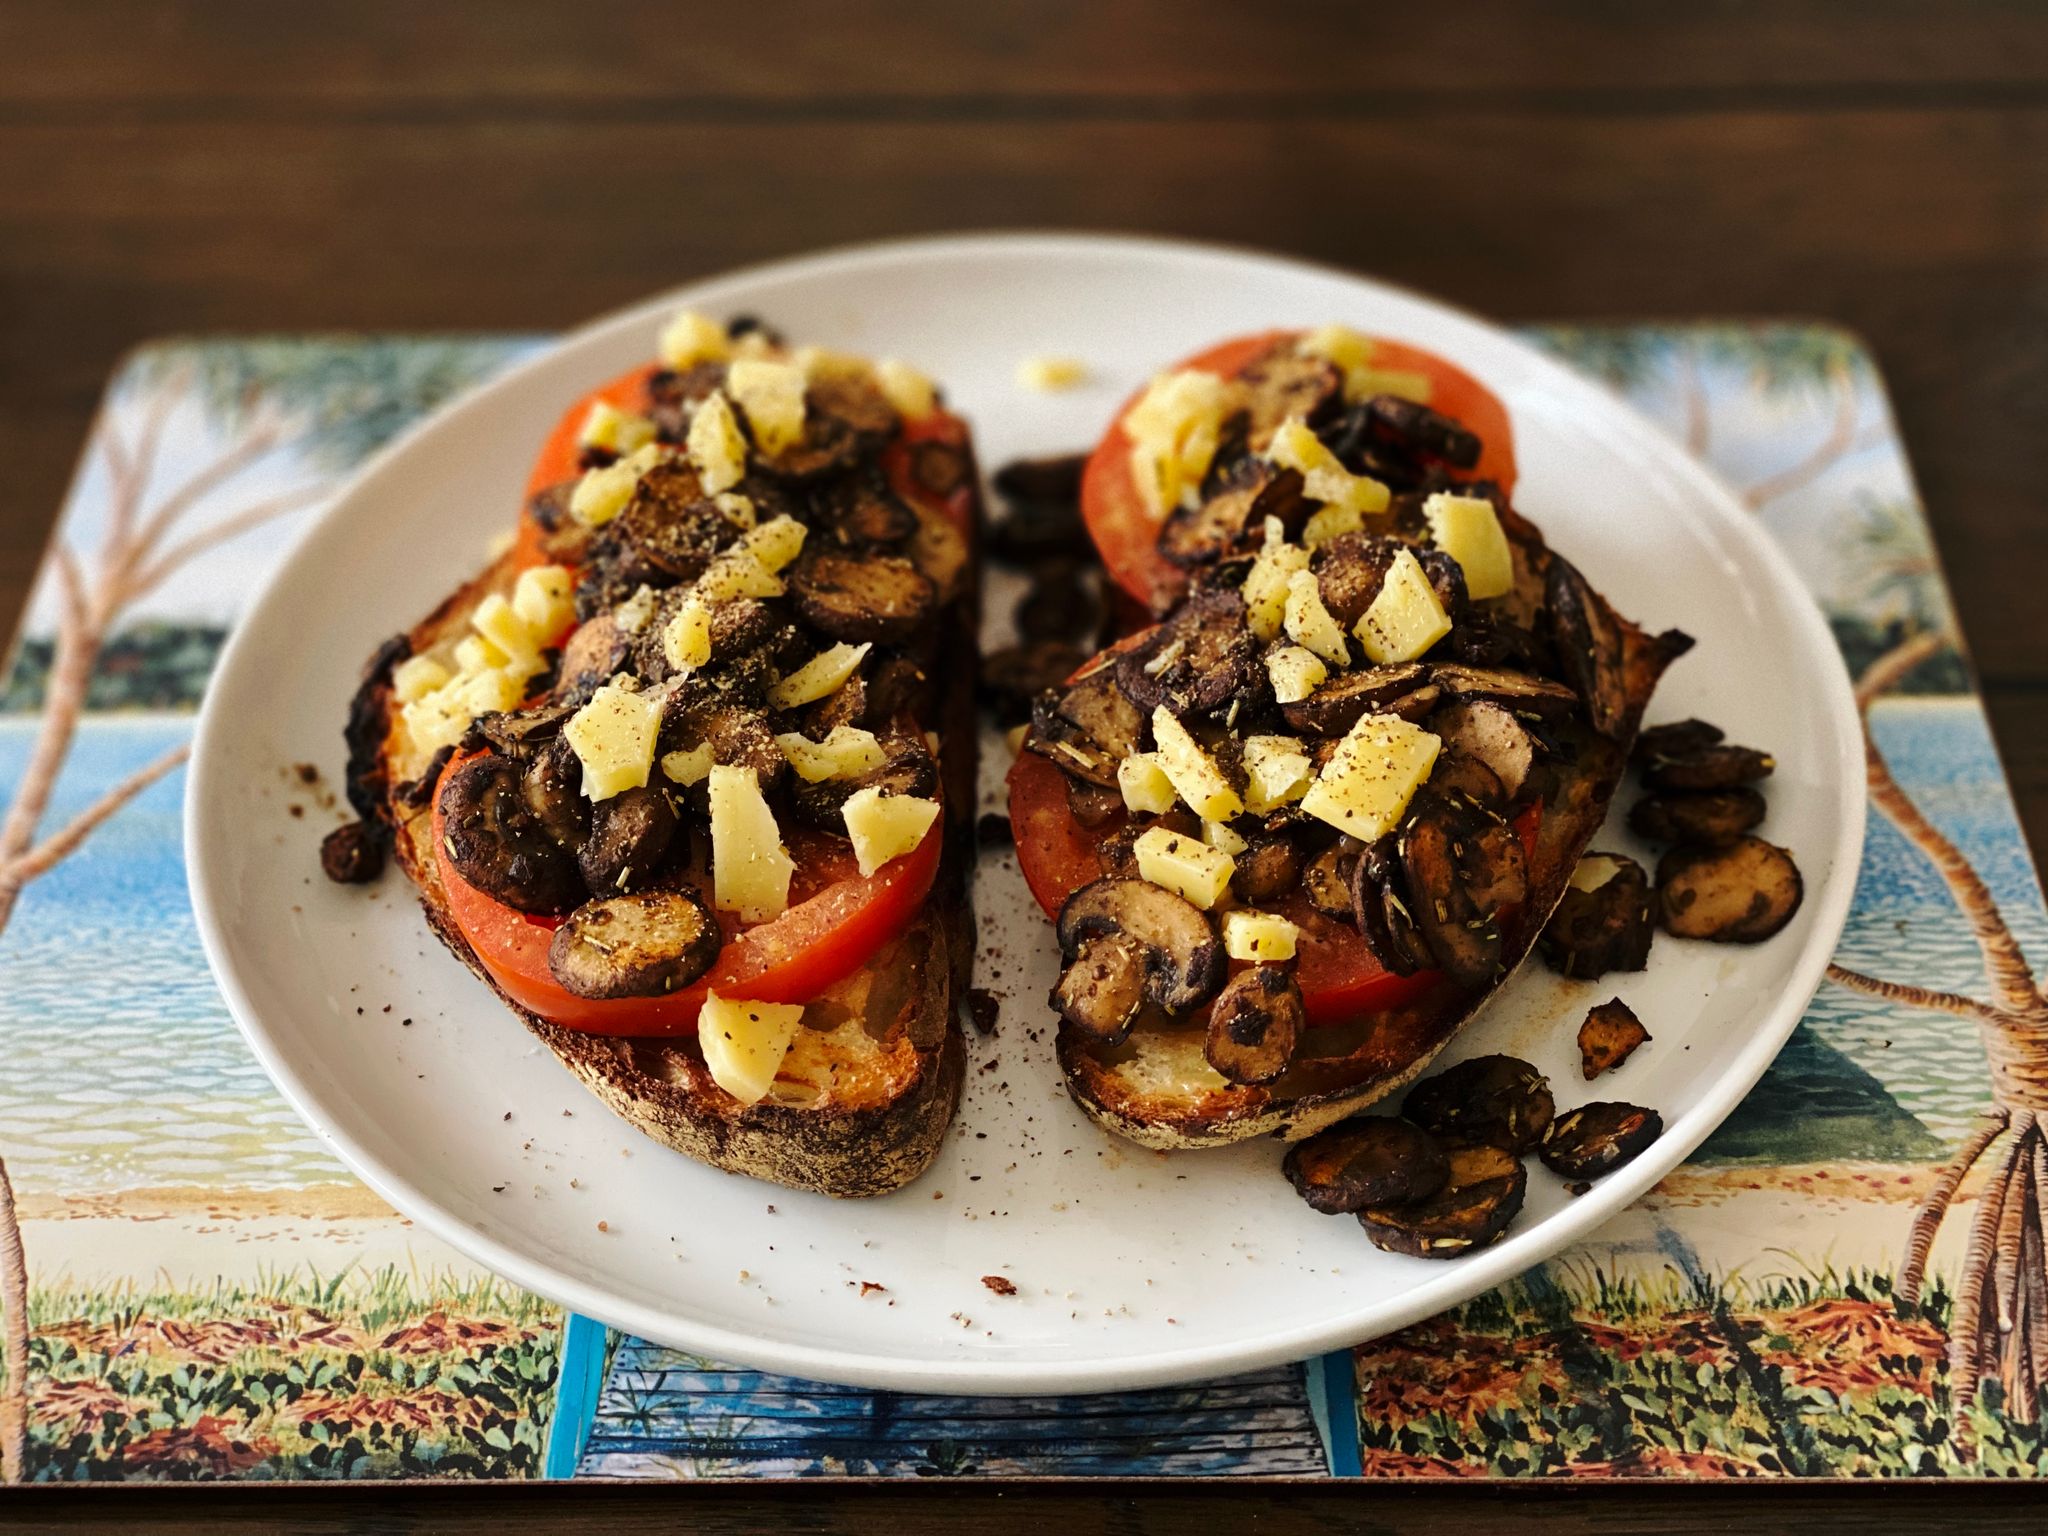 A photo of two slices of homemade bread sitting on a plate, topped with thick slices of tomato with mushrooms on them, and small pieces of crumbled up cheddar cheese atop it all.